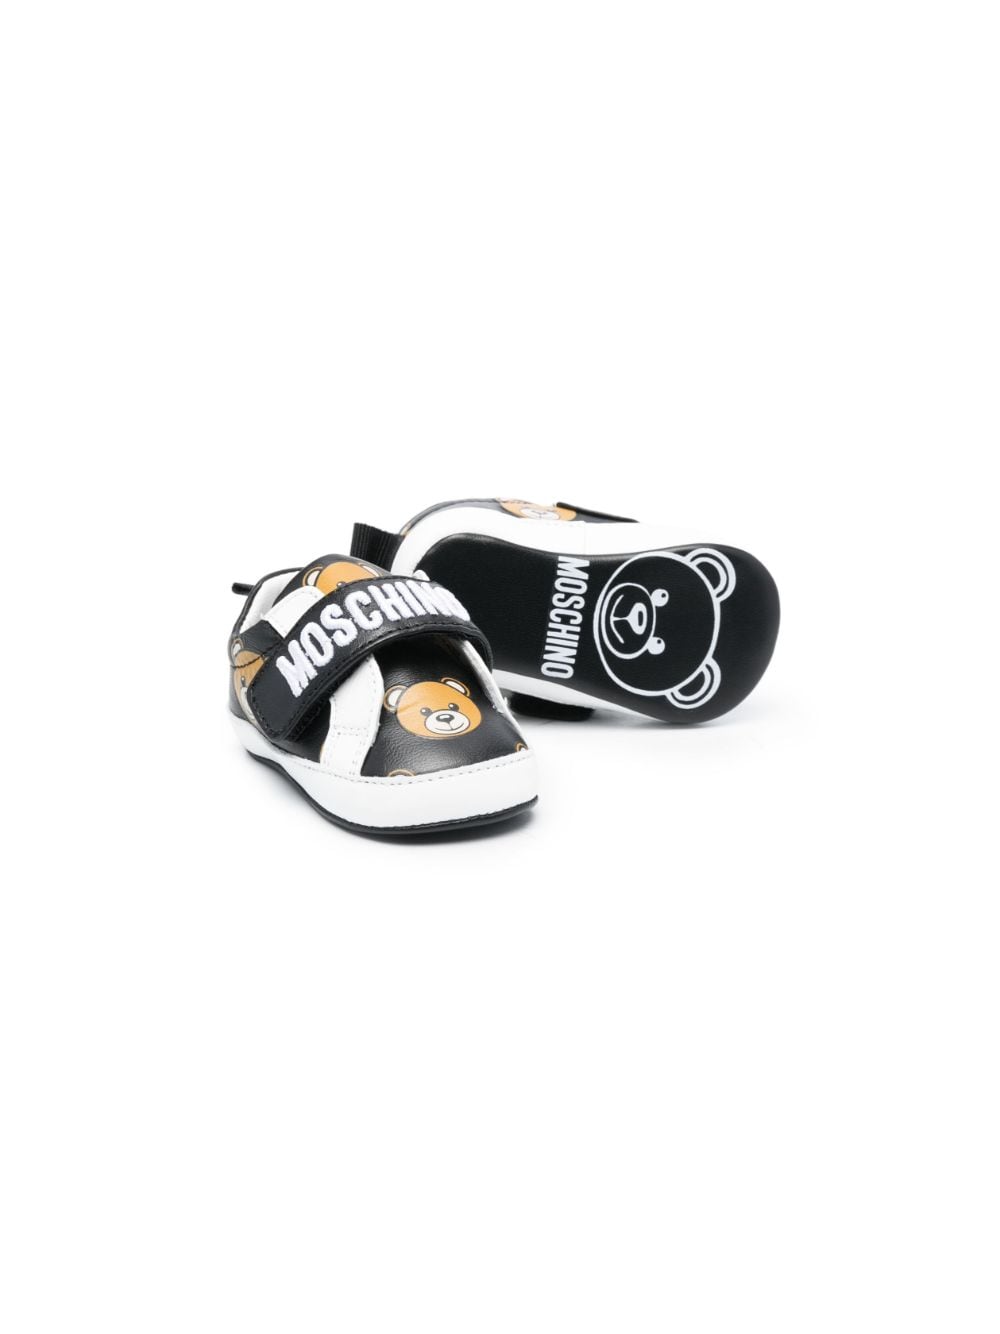 Black and white sneakers for newborns